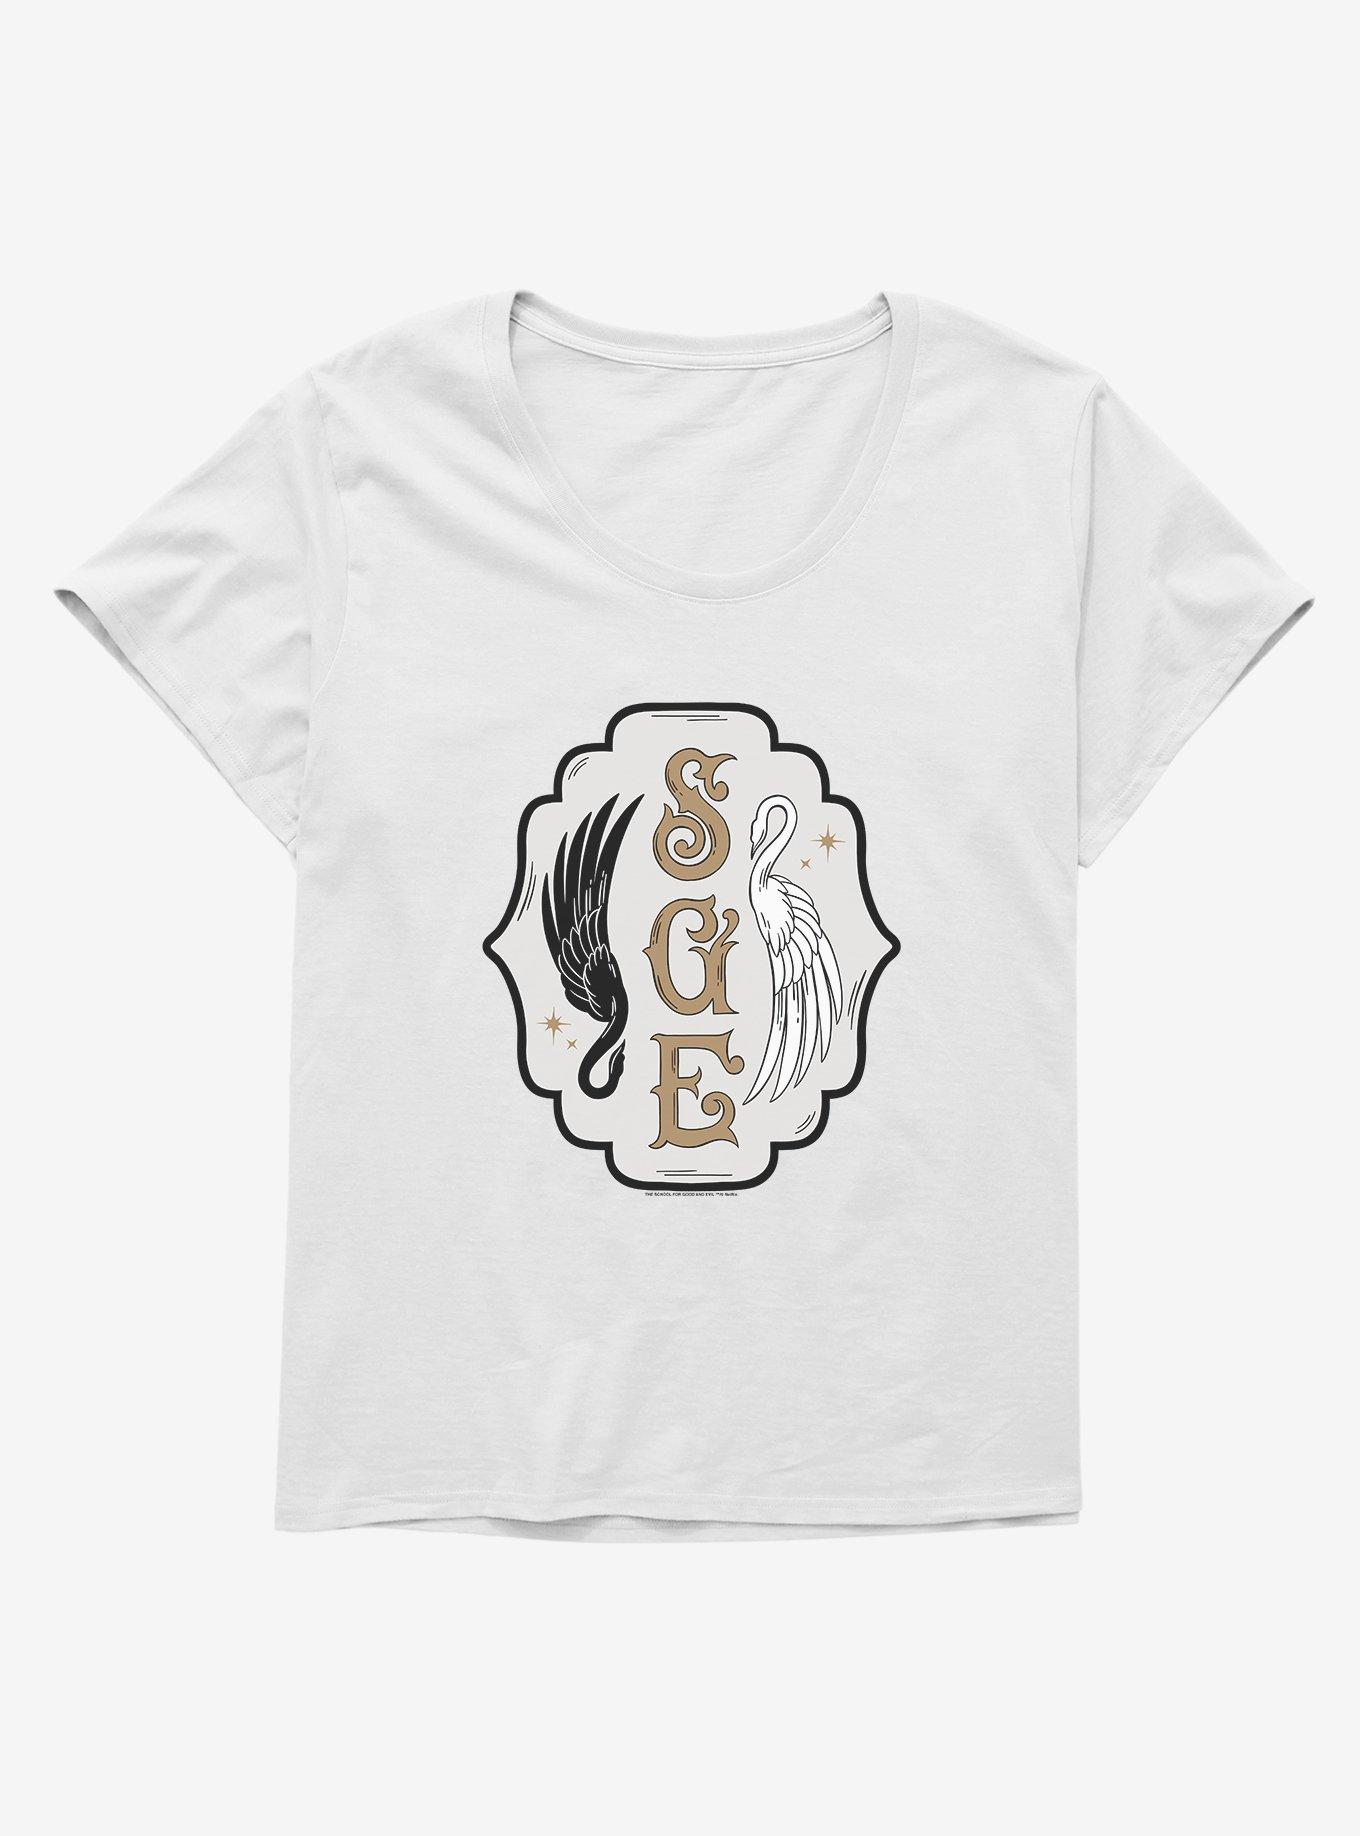 The School For Good And Evil Swan Logo Womens T-Shirt Plus Size, WHITE, hi-res